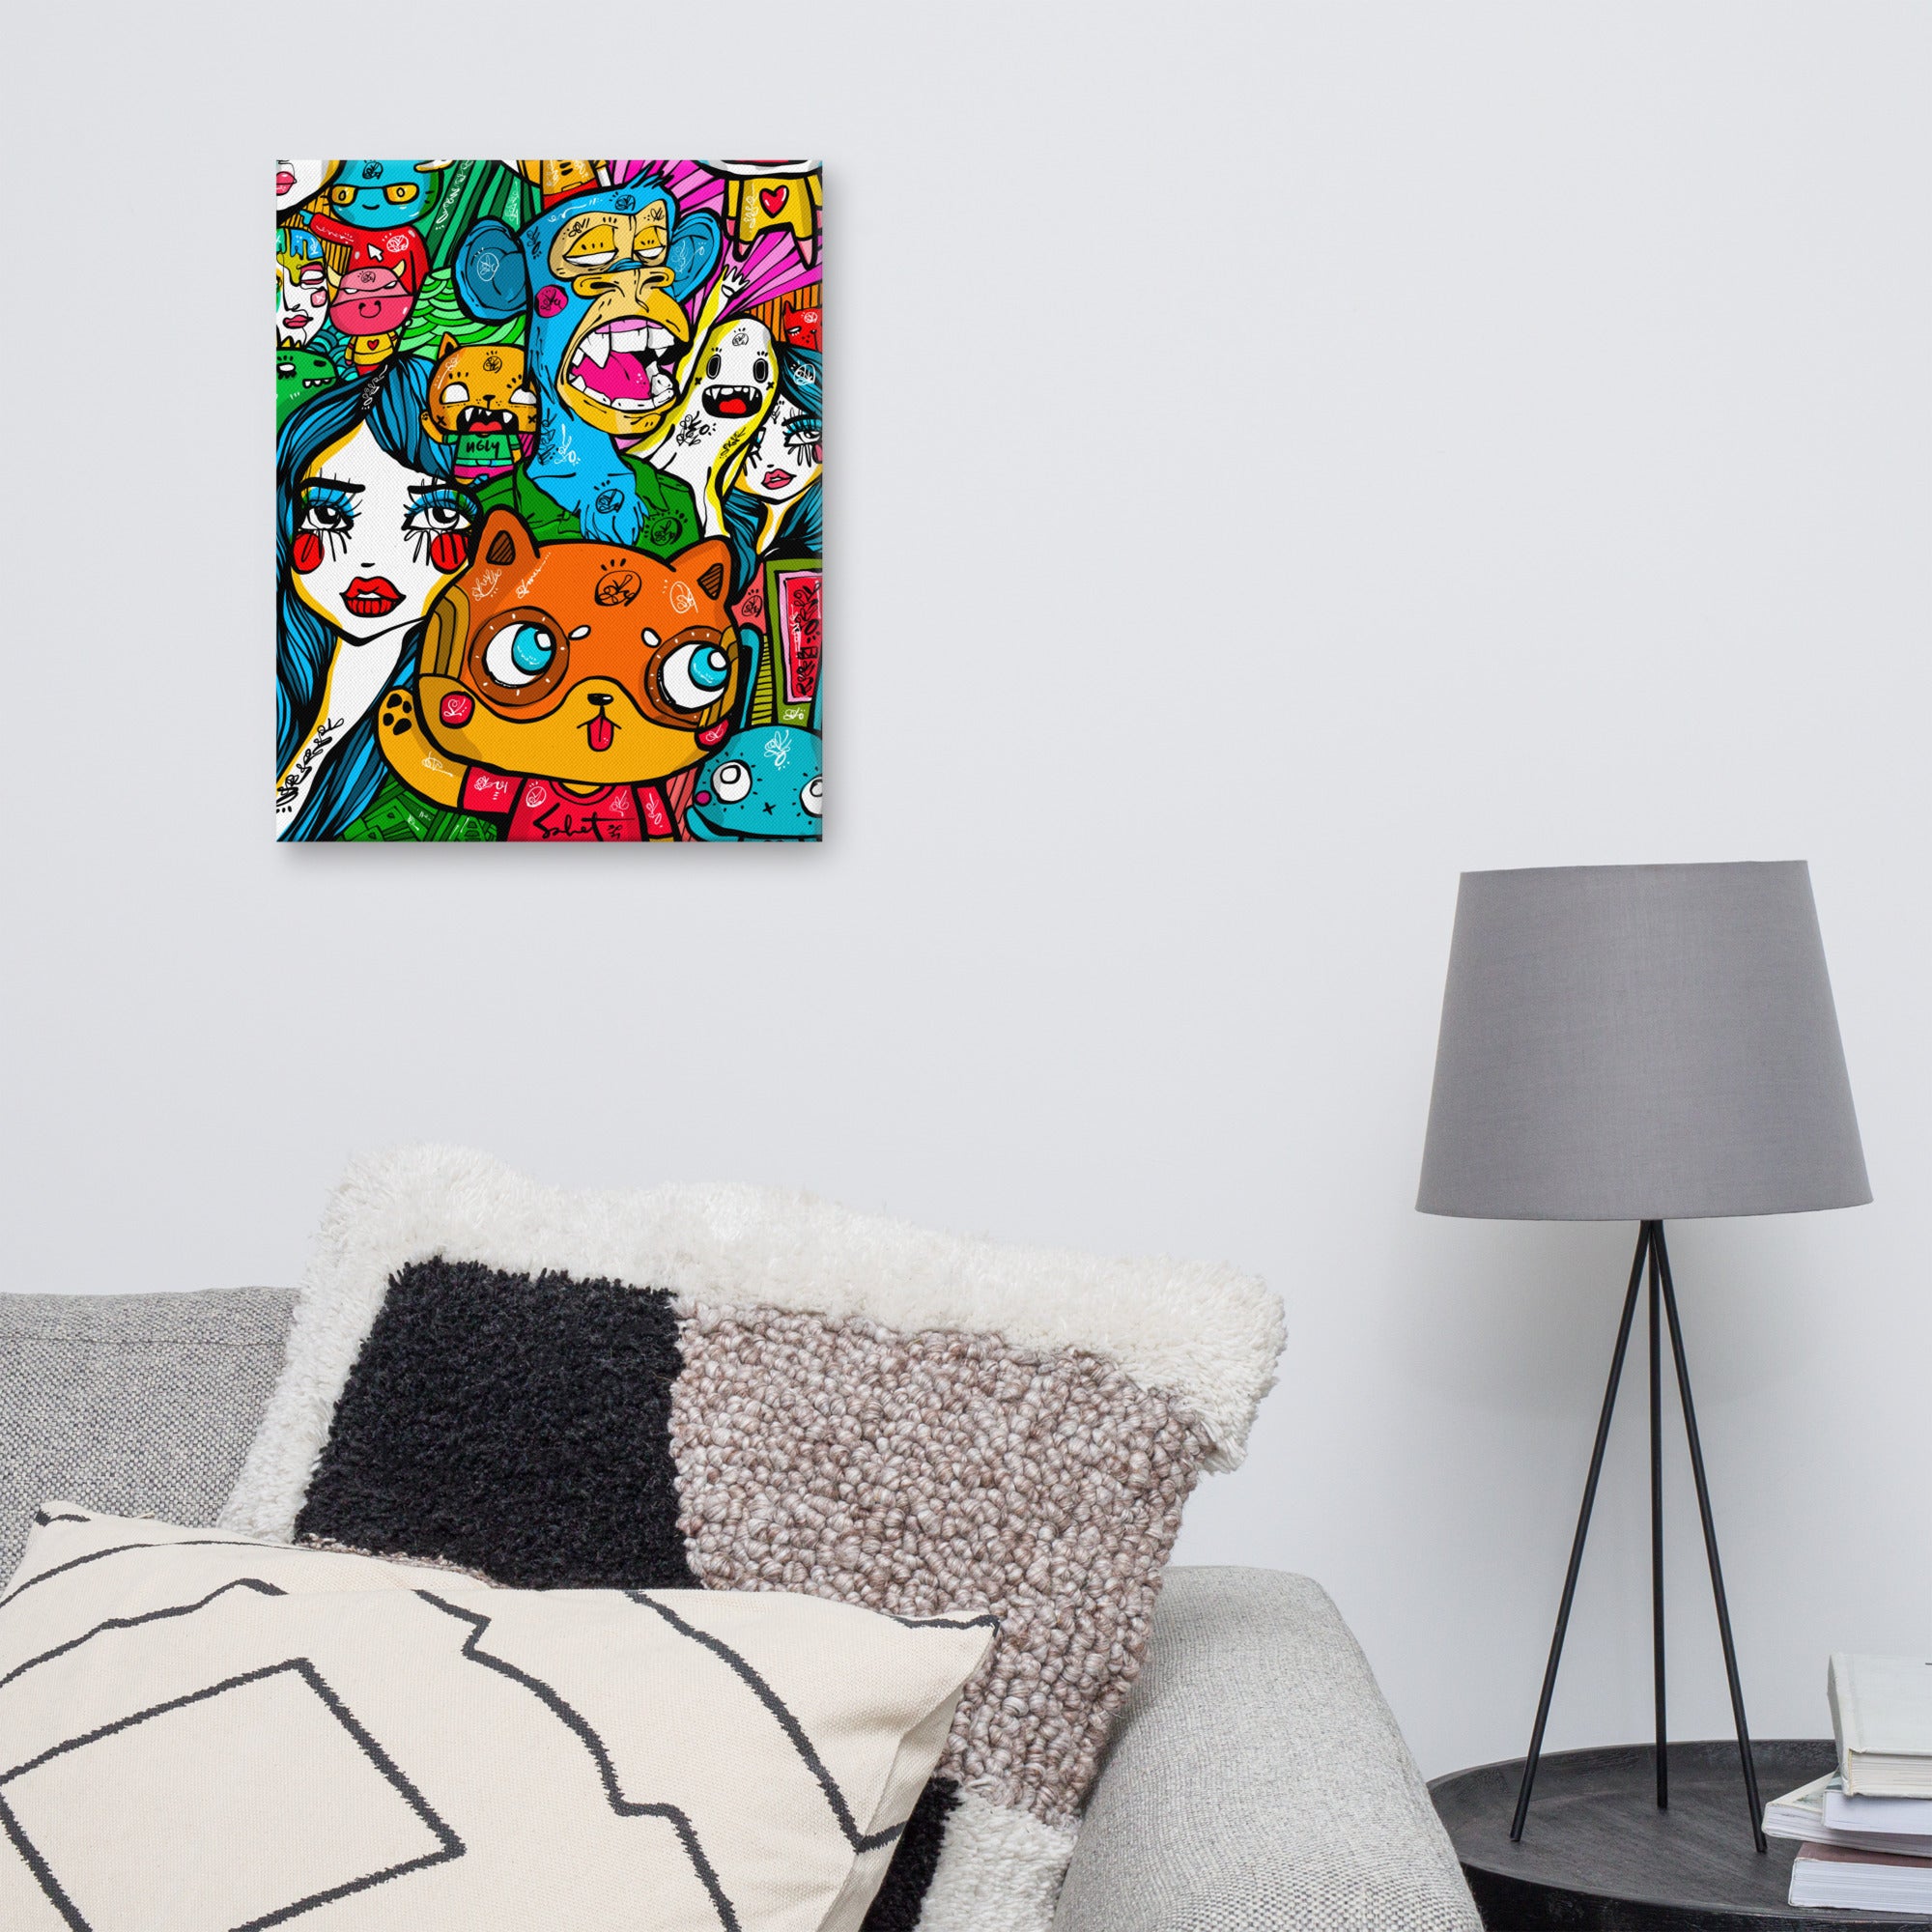 001 All Stars By Sabet 2021 Featuring Bored Apes Yacht Club Supershibas Ethereals, Madbulls, Coolcats Ugly Kitties and Pixopop Sabet Canvas Print